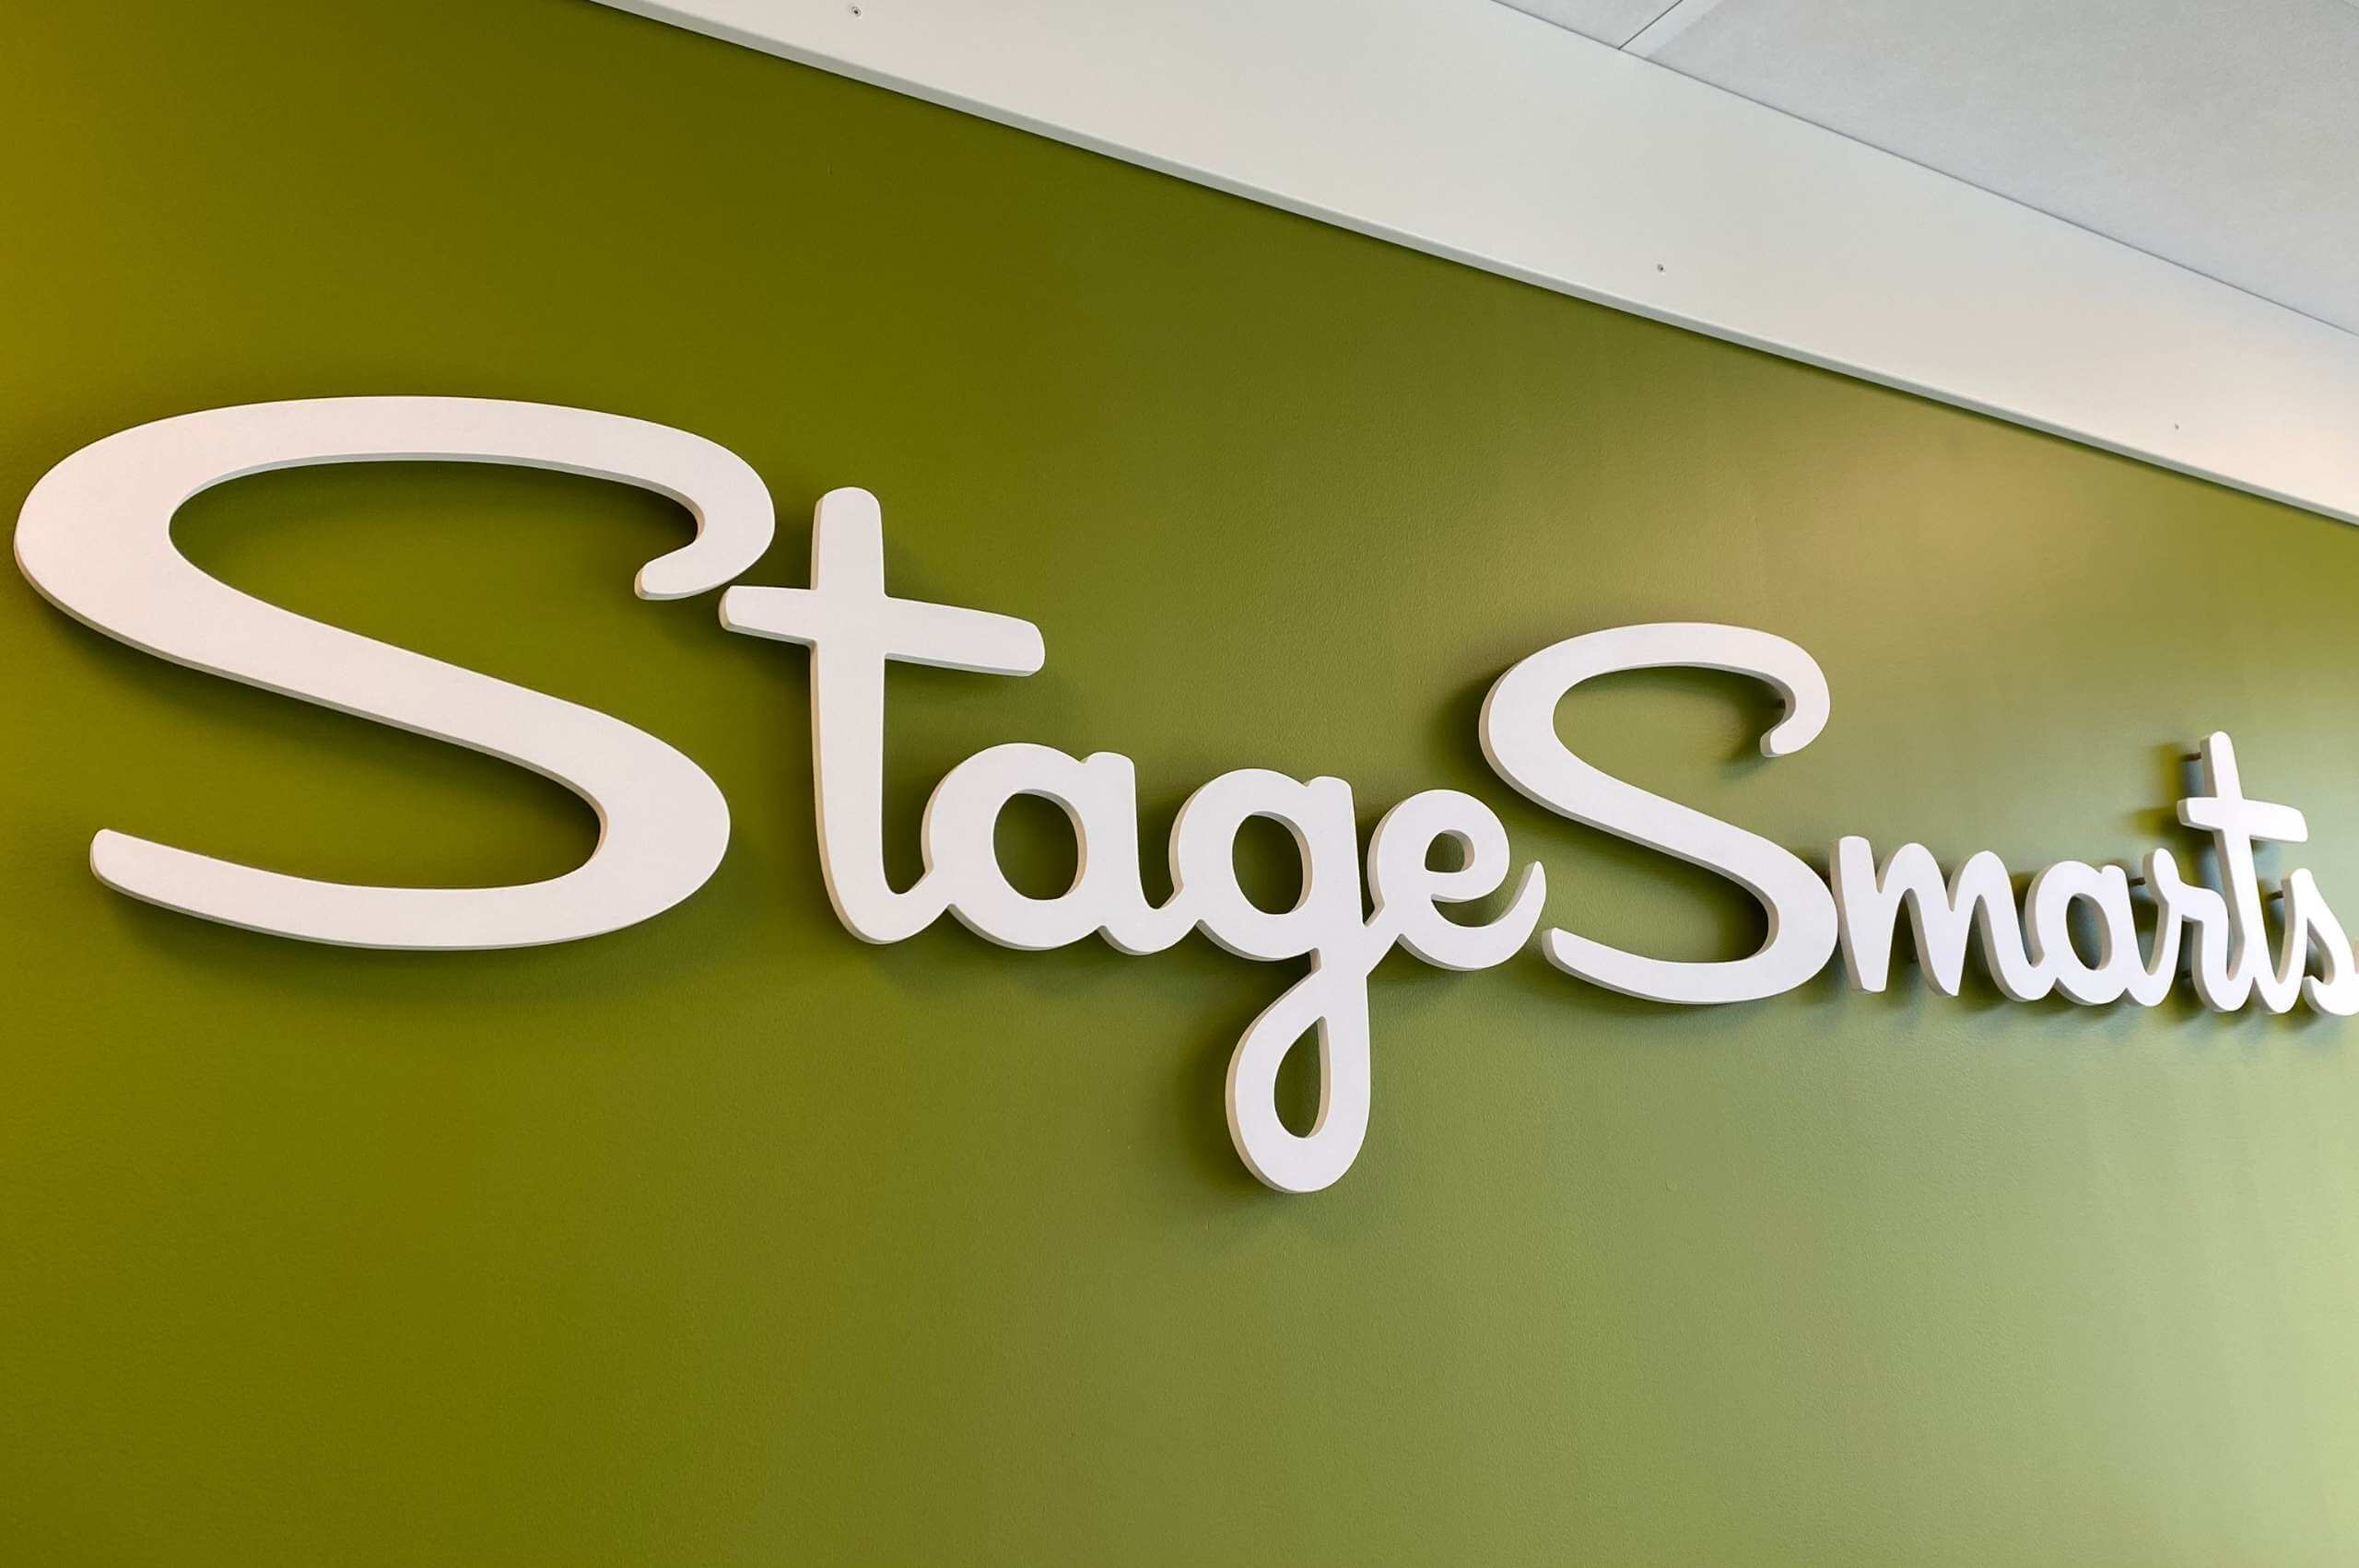 Stage smarts logo on wall